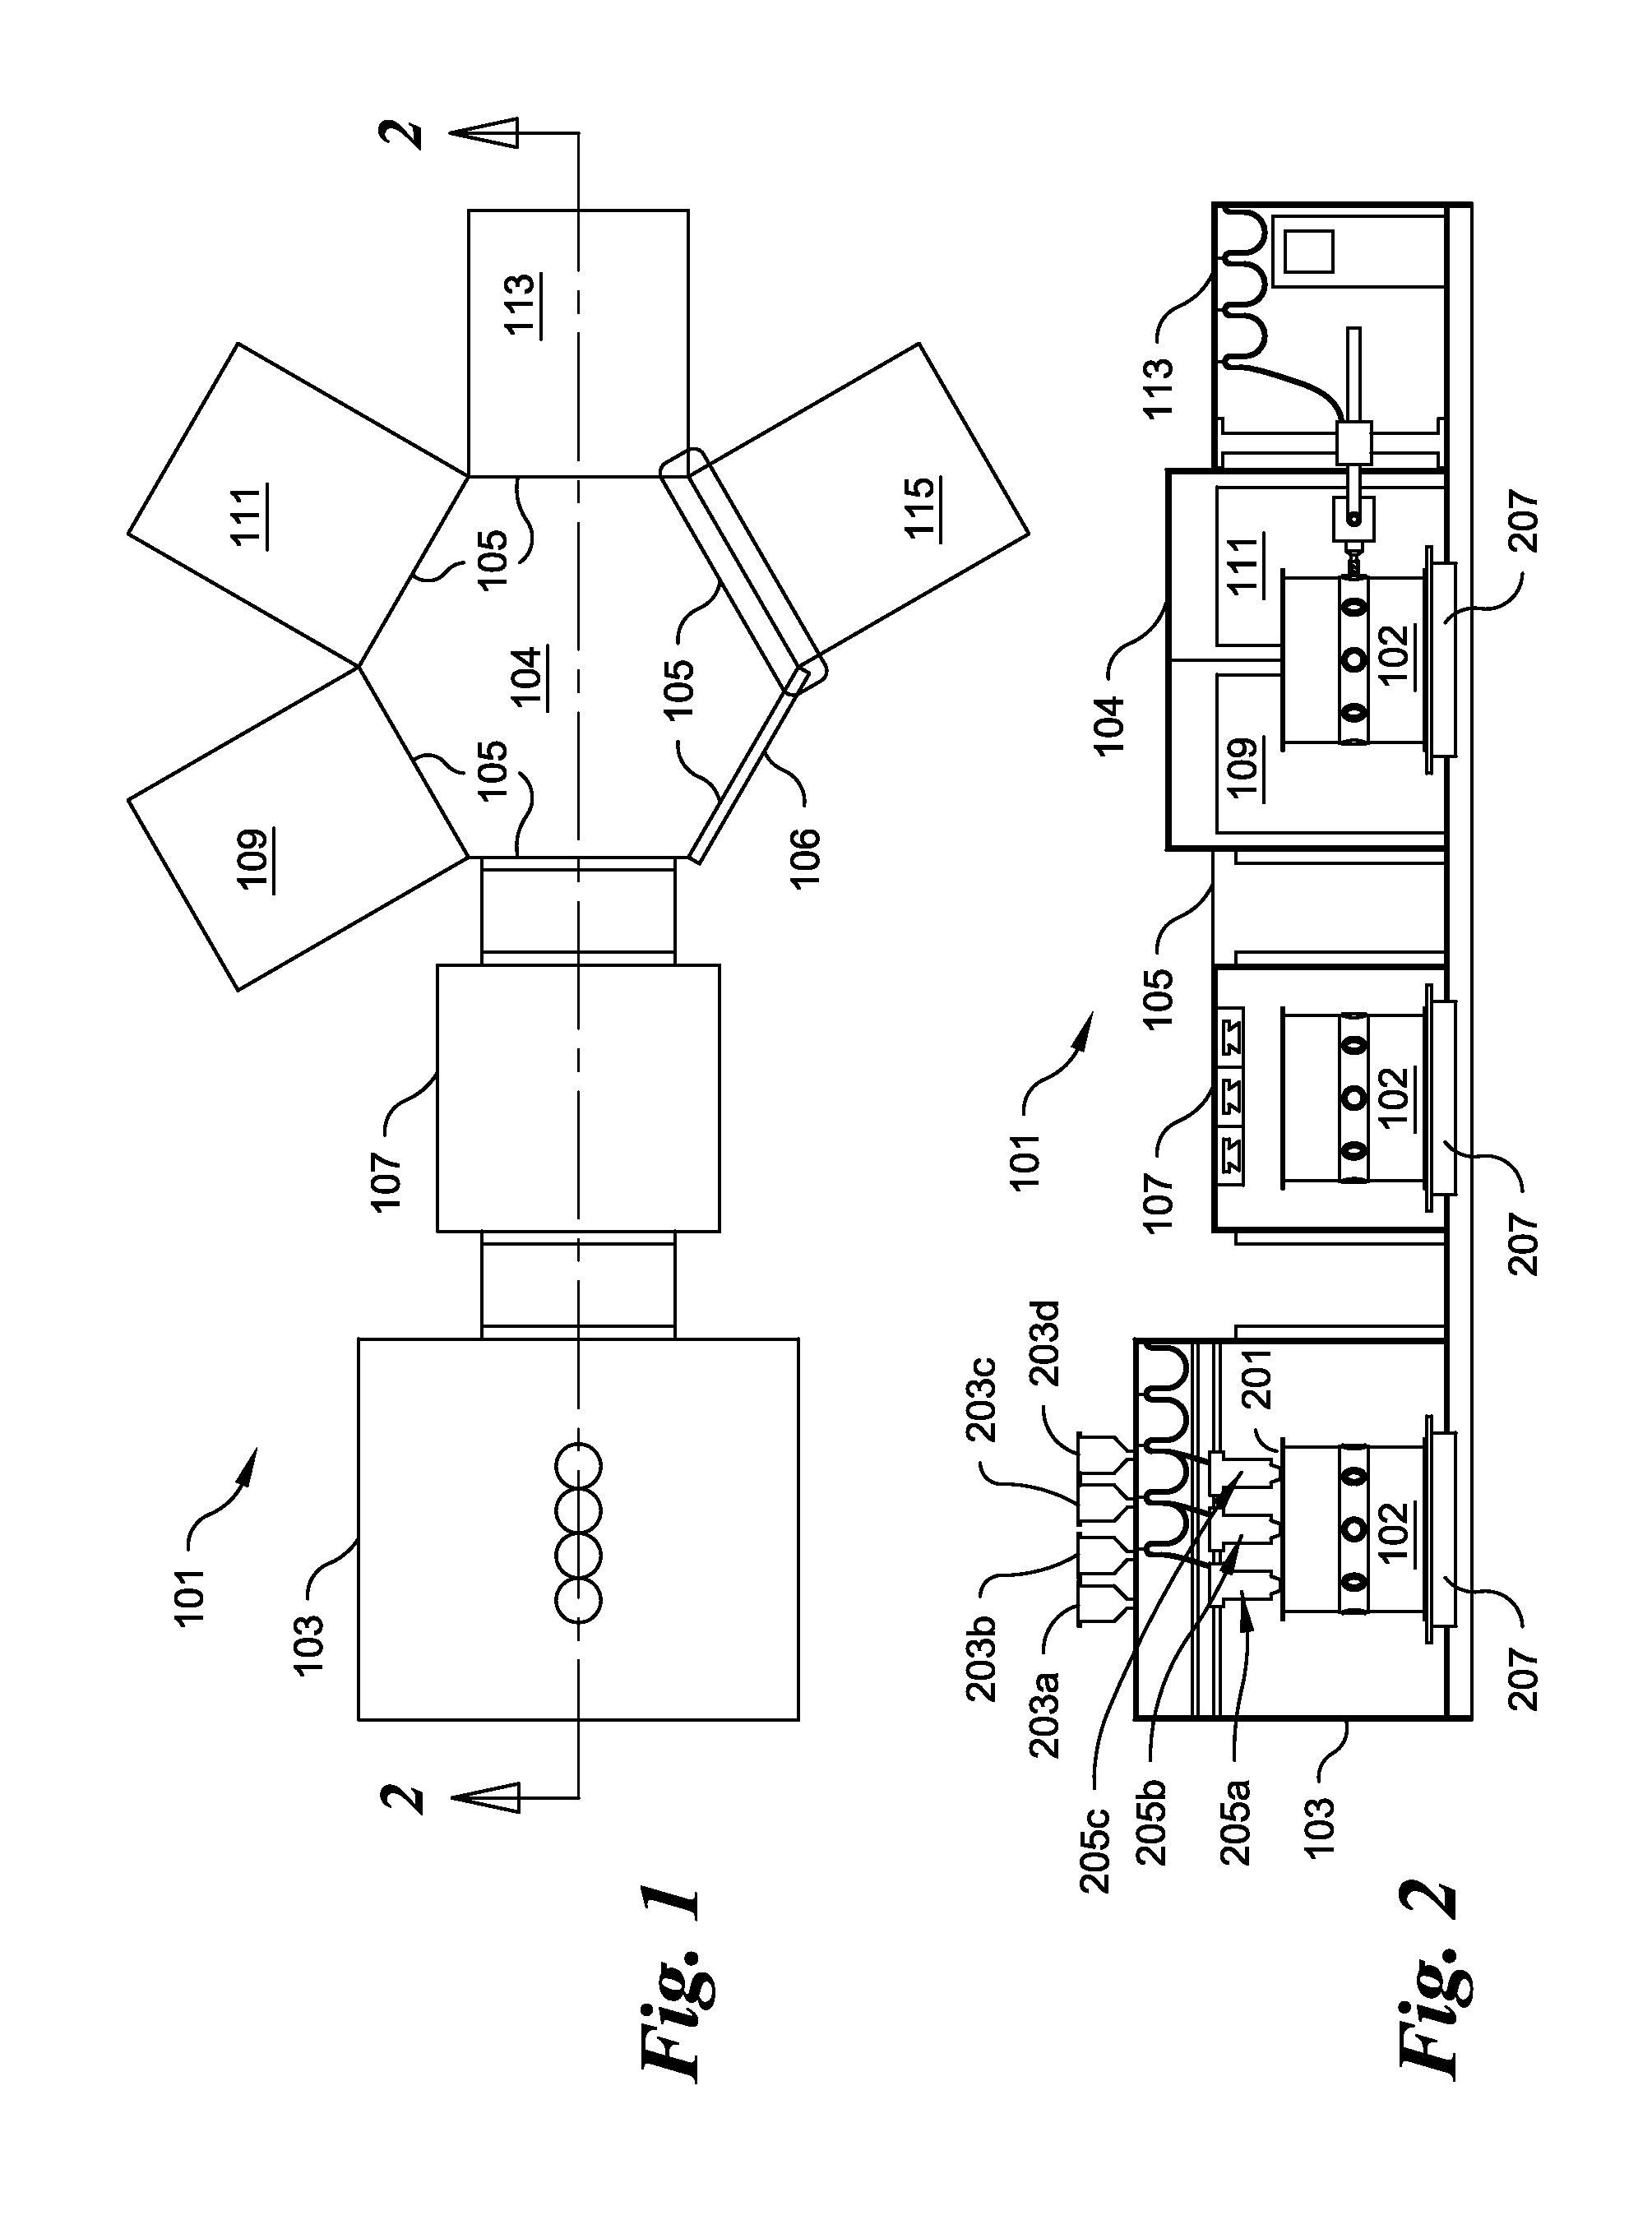 System and method for an integrated additive manufacturing cell for complex components